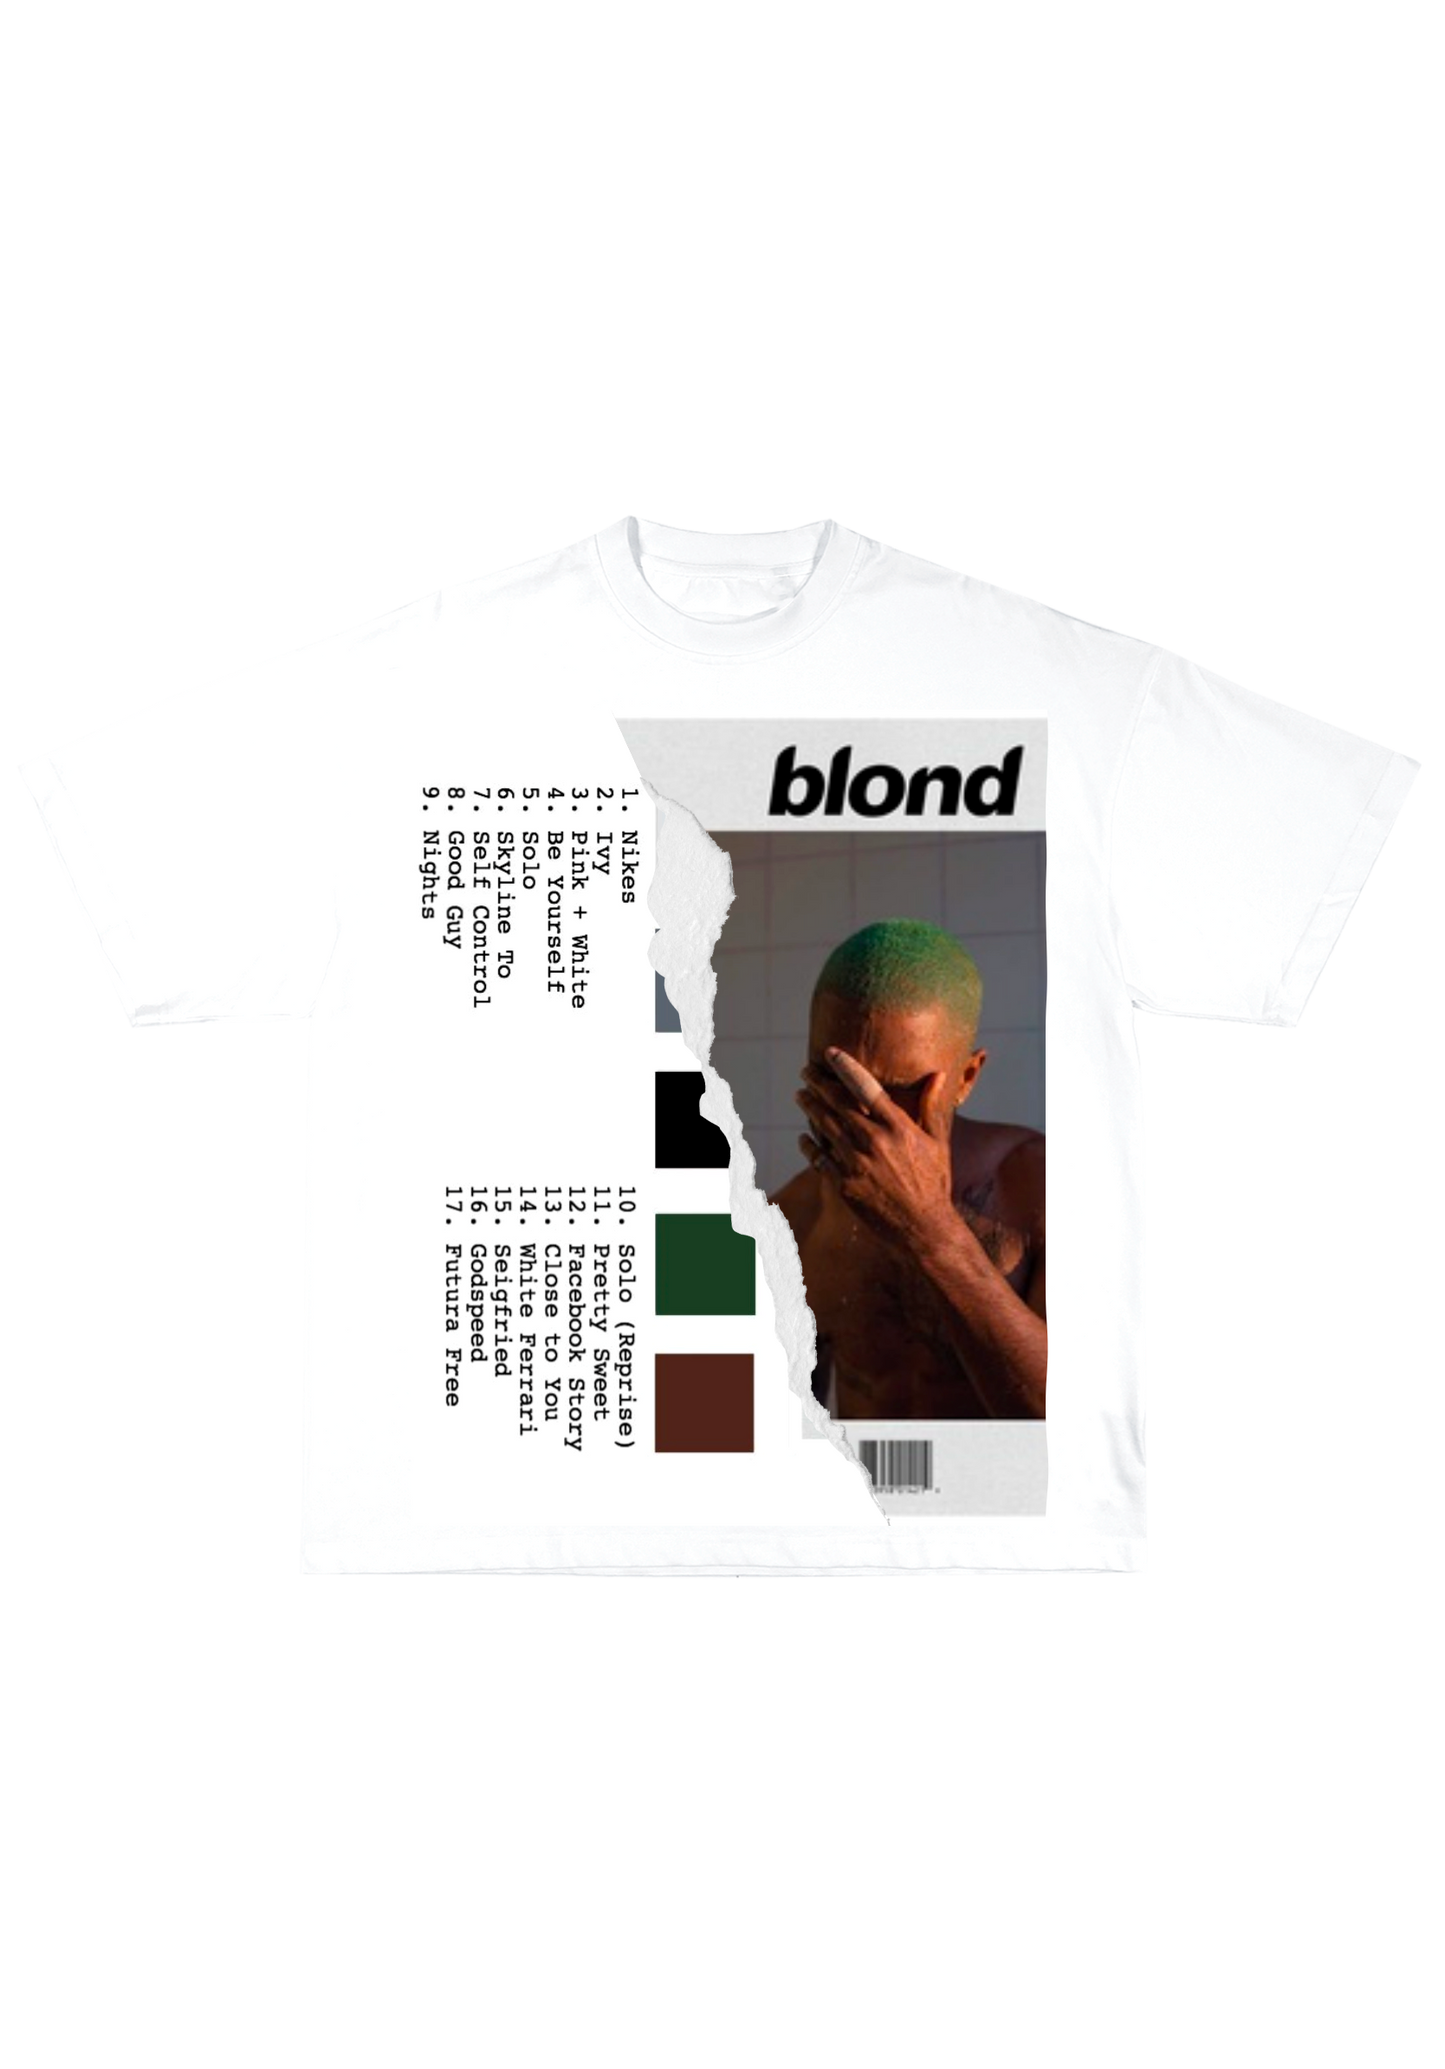 PRE-ORDER "Blond" Oversized Graphic Tee